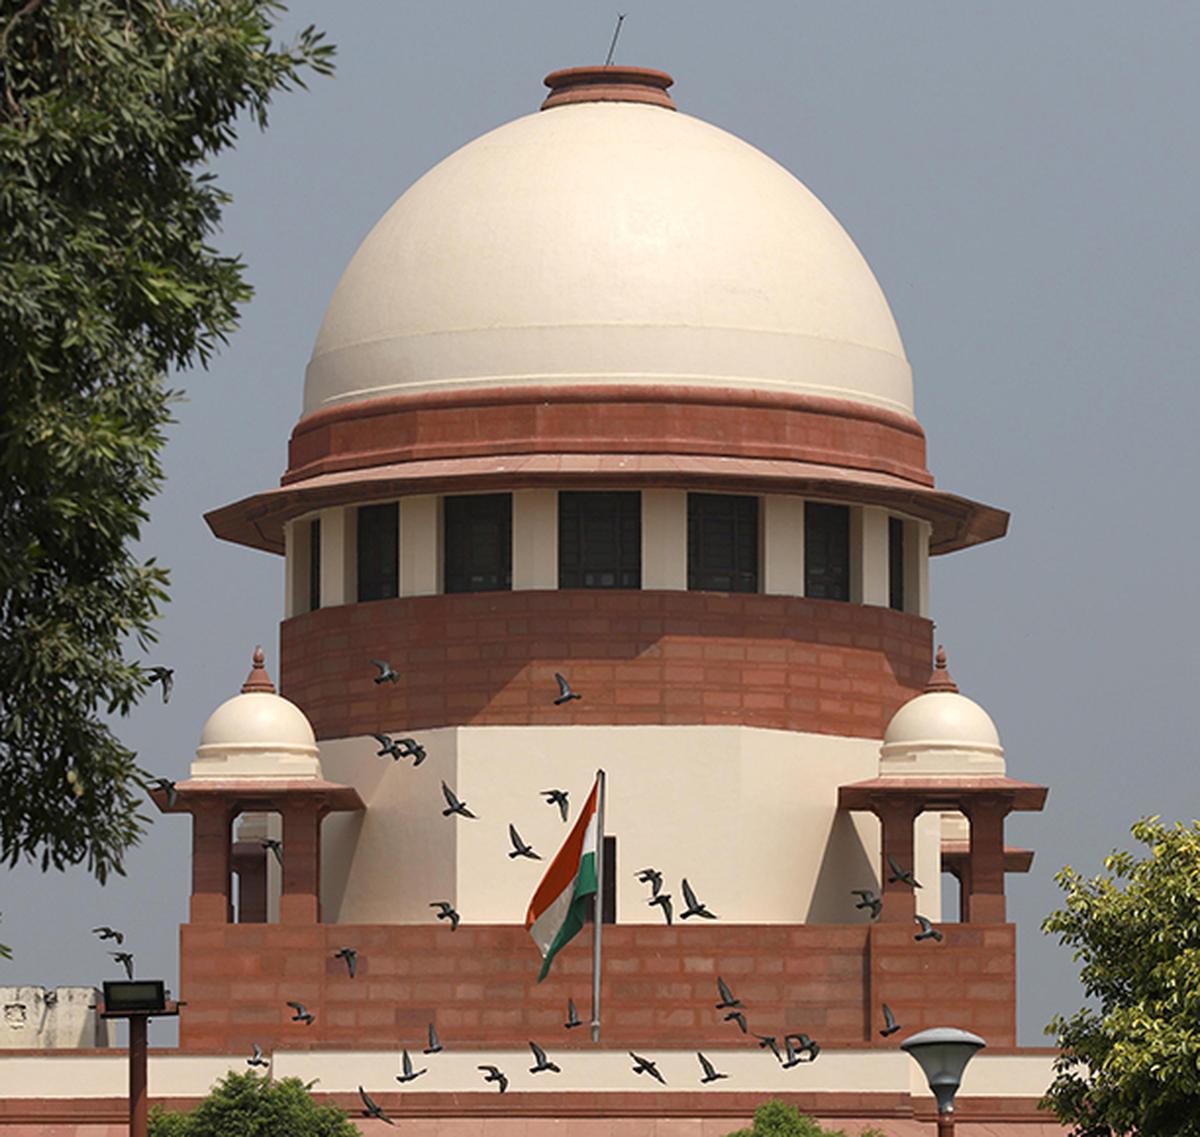 Morning Digest | Commenting on Collegium decisions ‘fashion’ for ex-judges, says SC; Moosewala murder mastermind held in U.S., says Punjab CM, and more